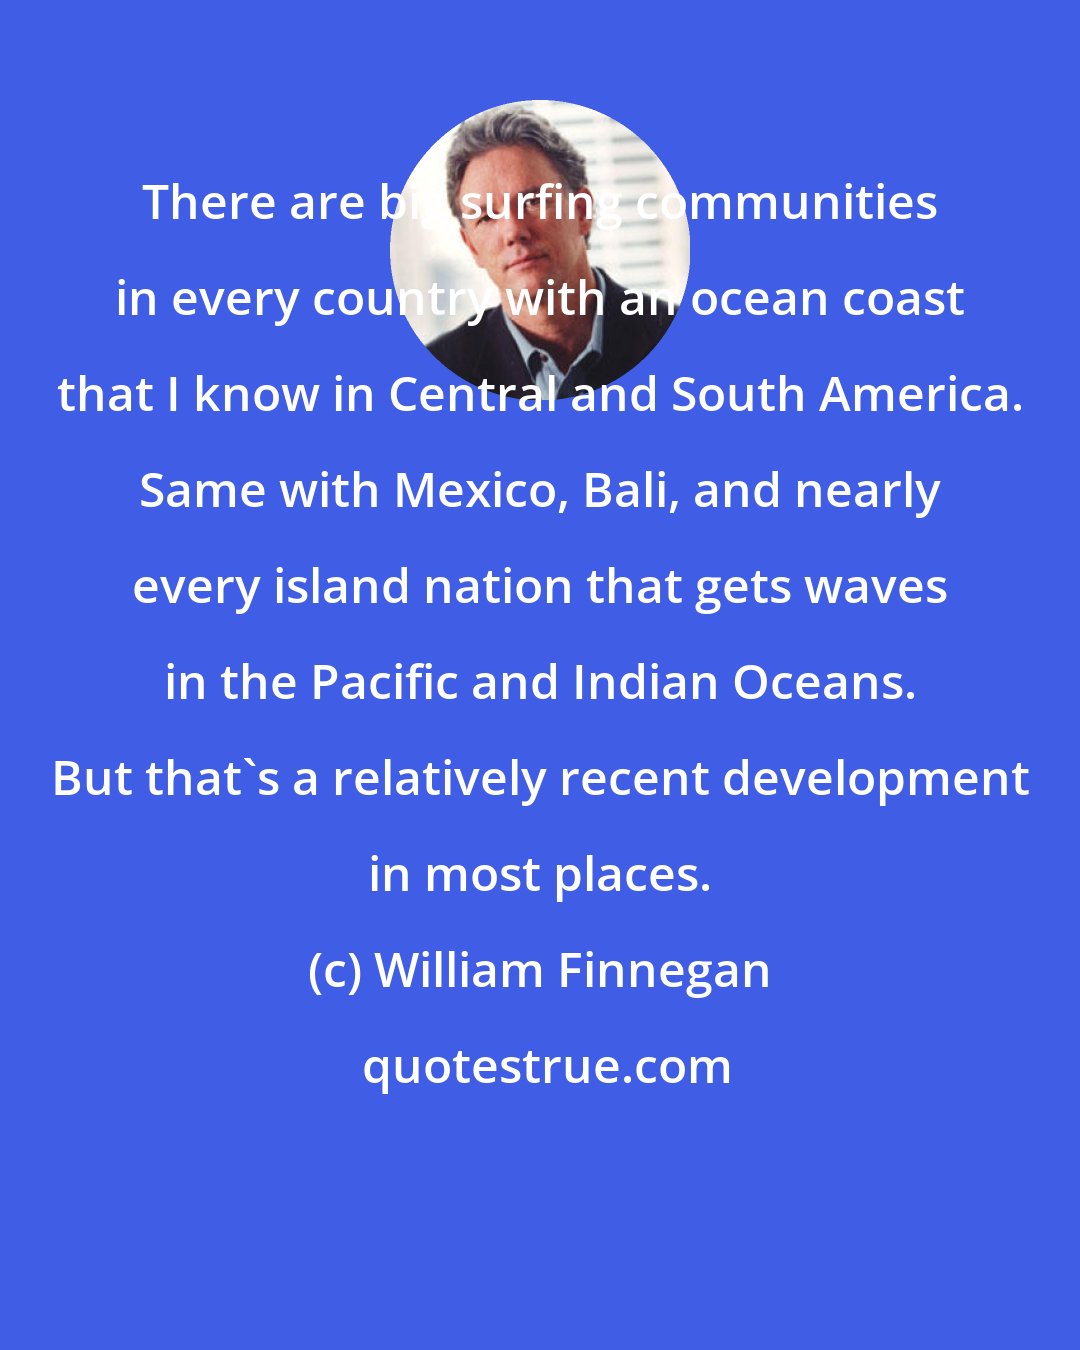 William Finnegan: There are big surfing communities in every country with an ocean coast that I know in Central and South America. Same with Mexico, Bali, and nearly every island nation that gets waves in the Pacific and Indian Oceans. But that's a relatively recent development in most places.